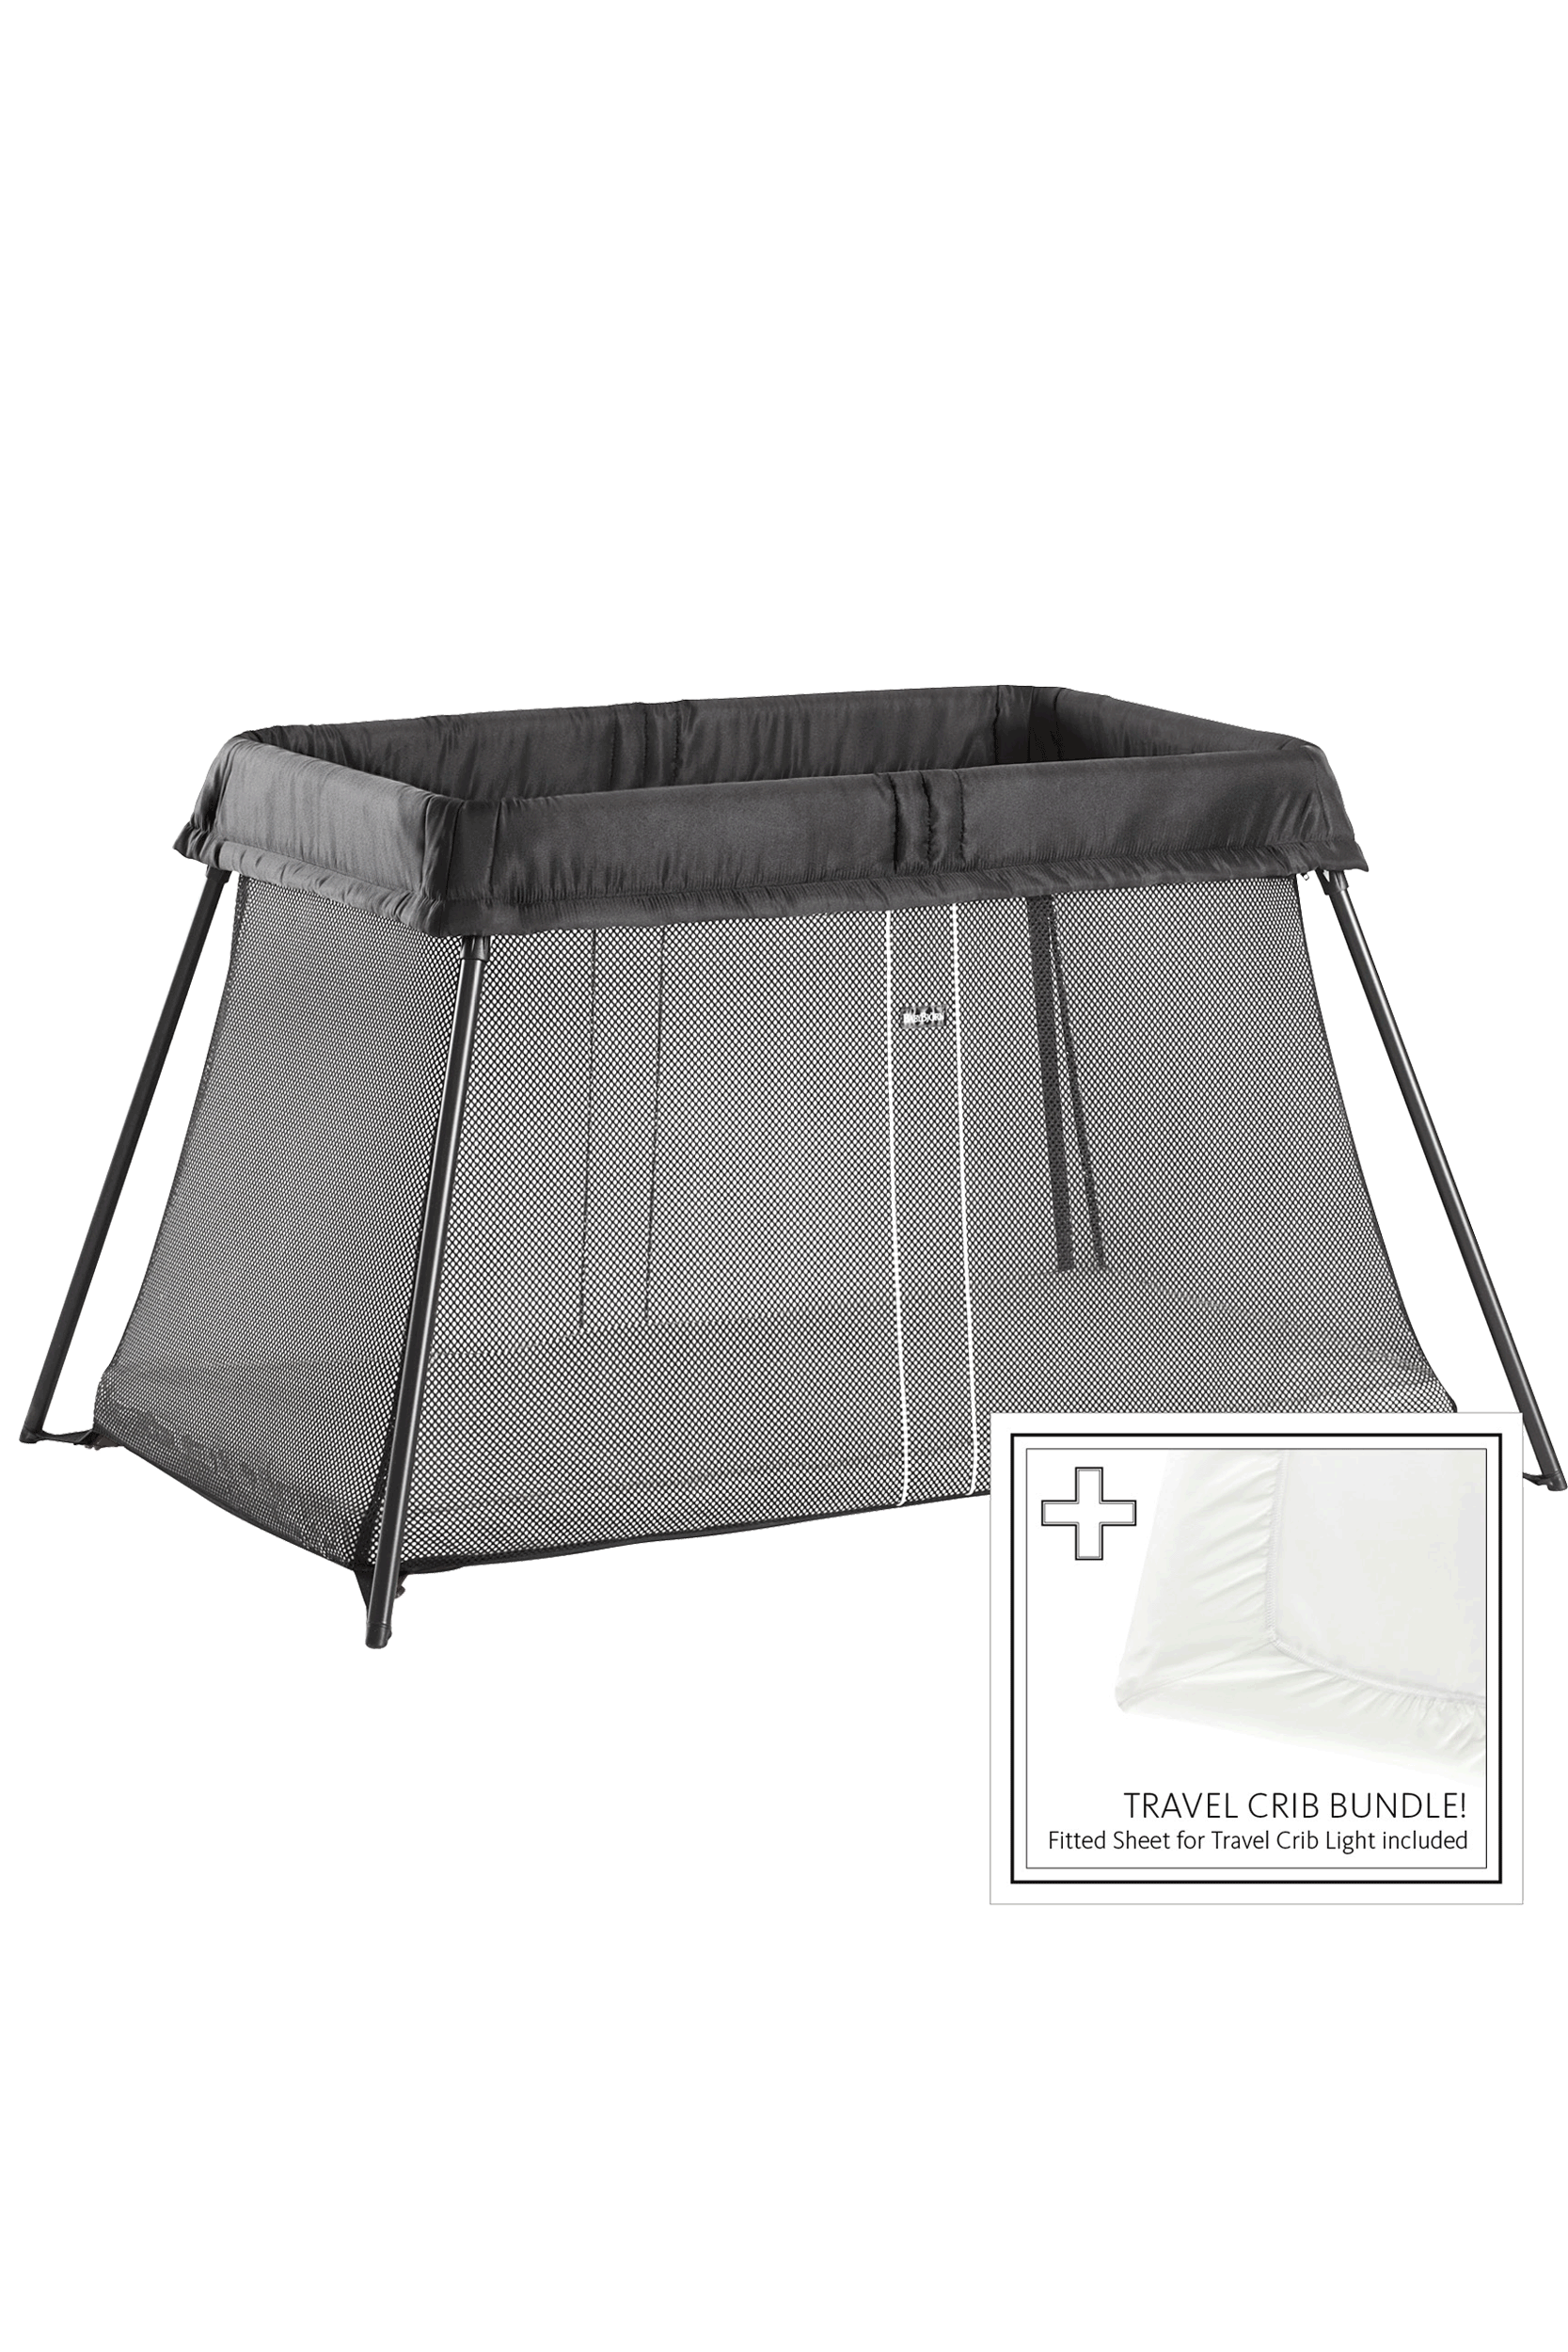 BabyBjorn Travel Crib Light in Black with Fitted Sheet